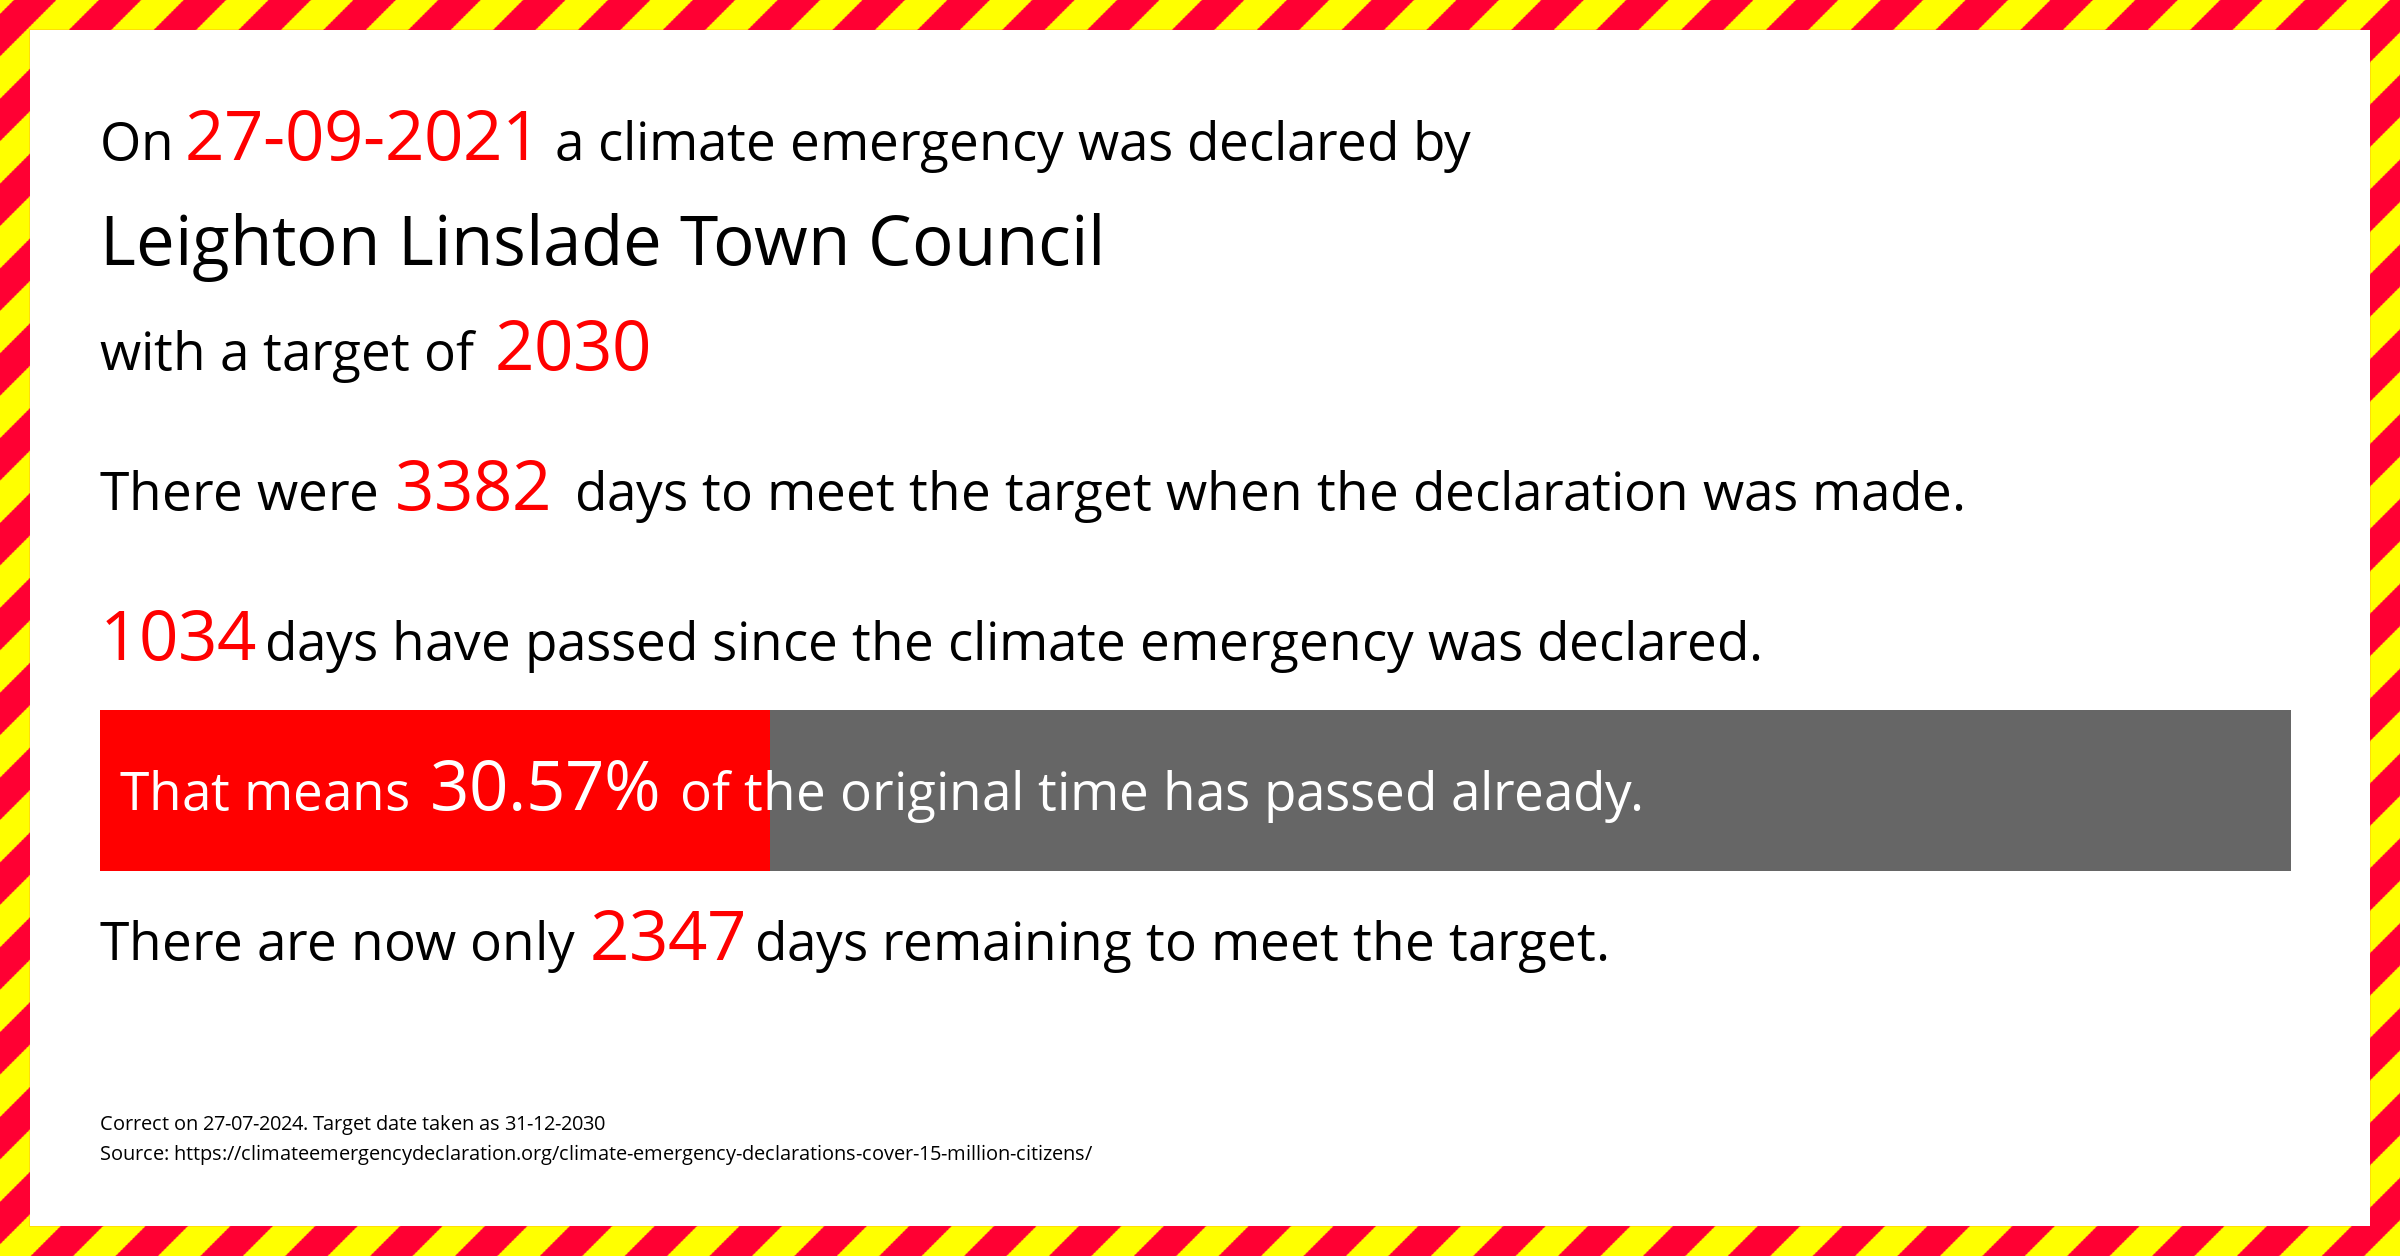 Leighton Linslade Town Council  declared a Climate emergency on Monday 27th September 2021, with a target of 2030.